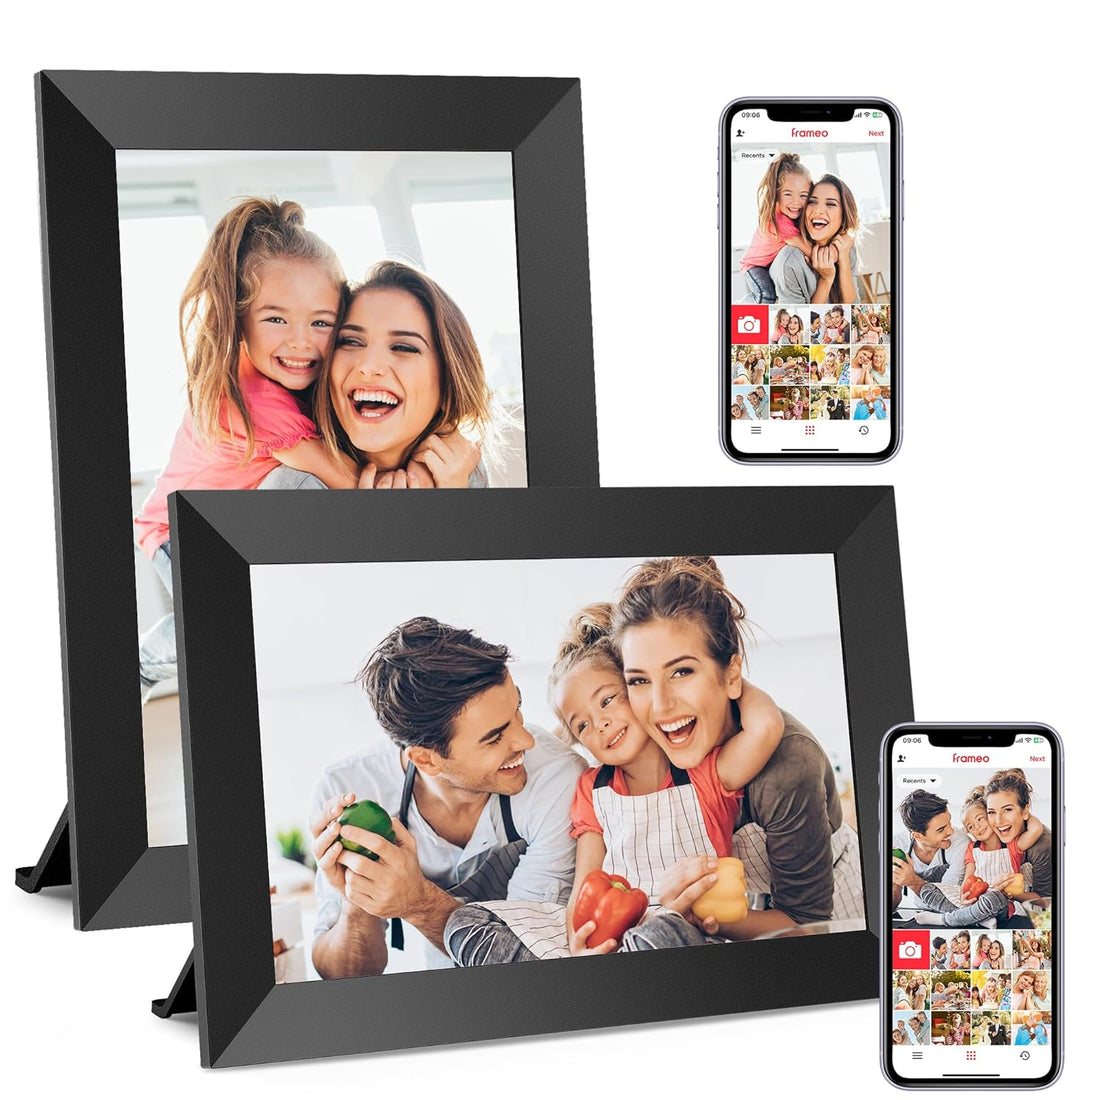 Frameo WLAN Digital Picture Frame, Pack of 2, 10.1 Inch Electronic Picture Frame with 1280 x 800 IPS Touch Screen, 32GB Memory, Automatic Rotation, Share Photos Instantly from Anywhere